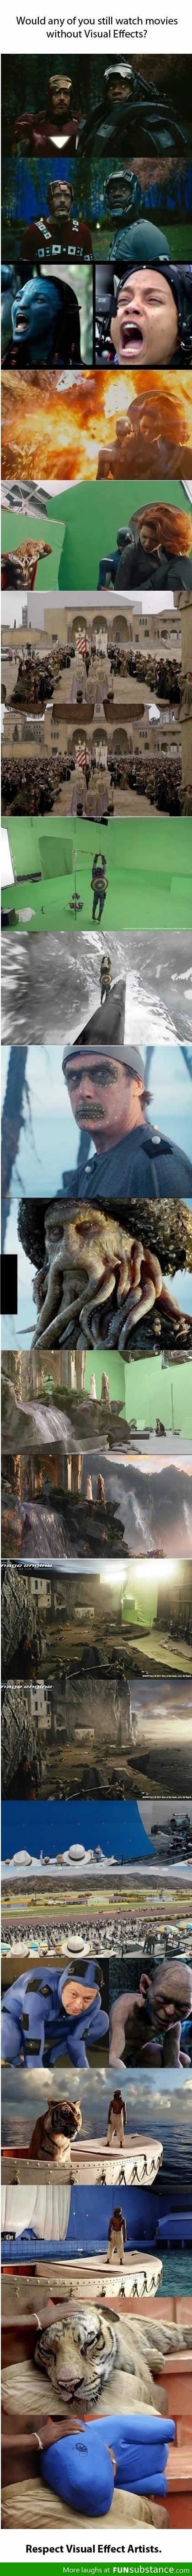 Epic movie visual effects